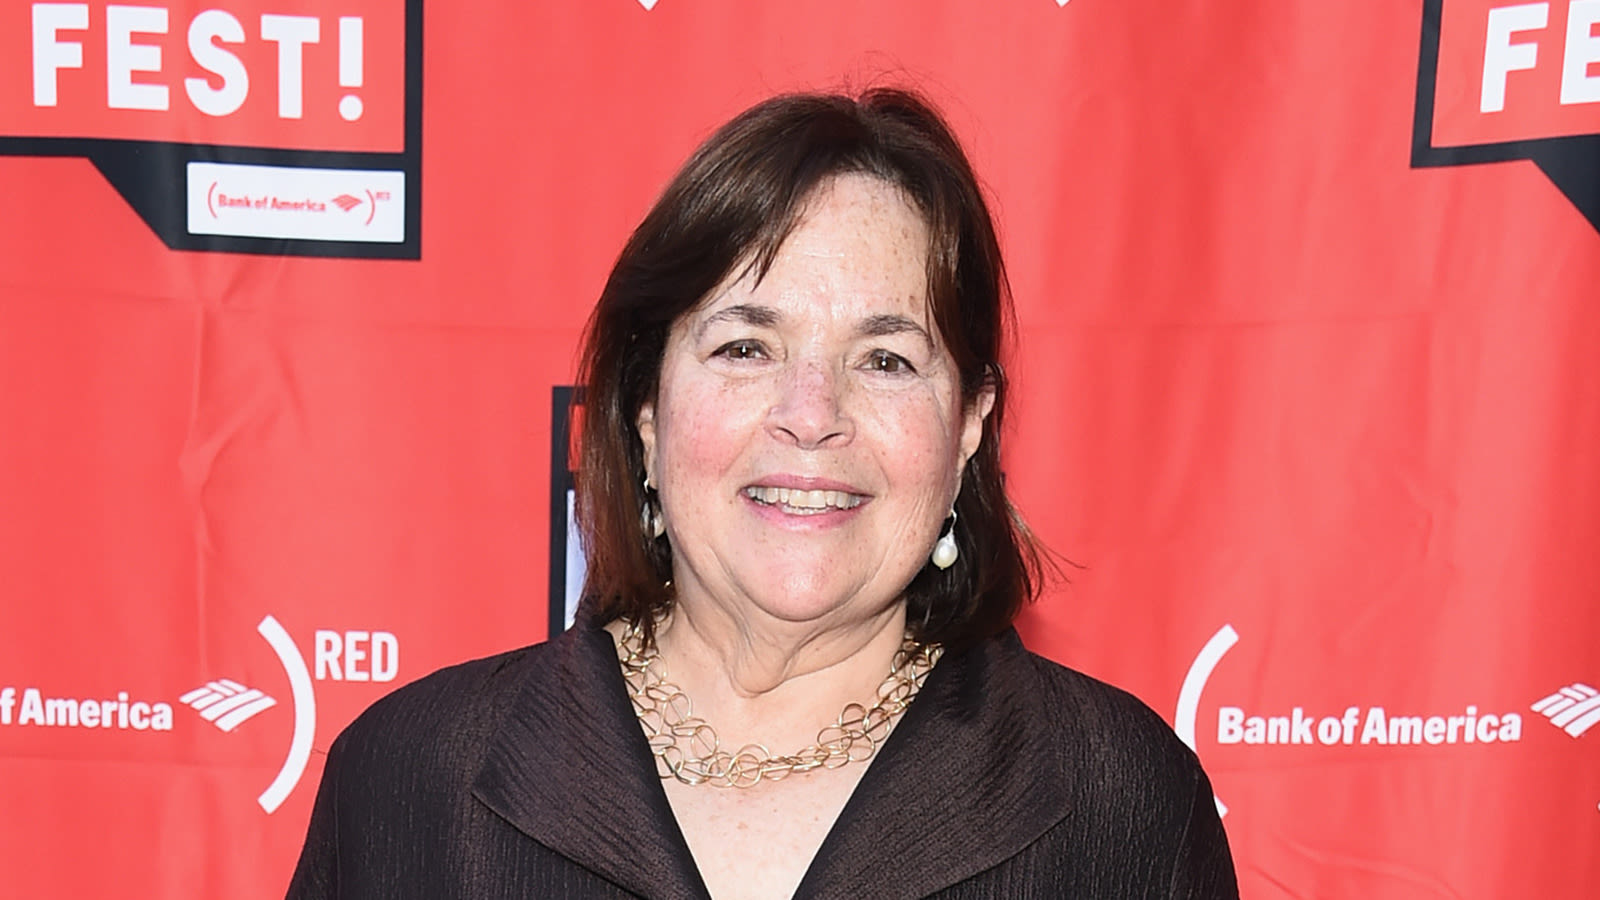 Ina Garten's Favorite Way To Eat Toast Is Just As Bougie As You'd Think